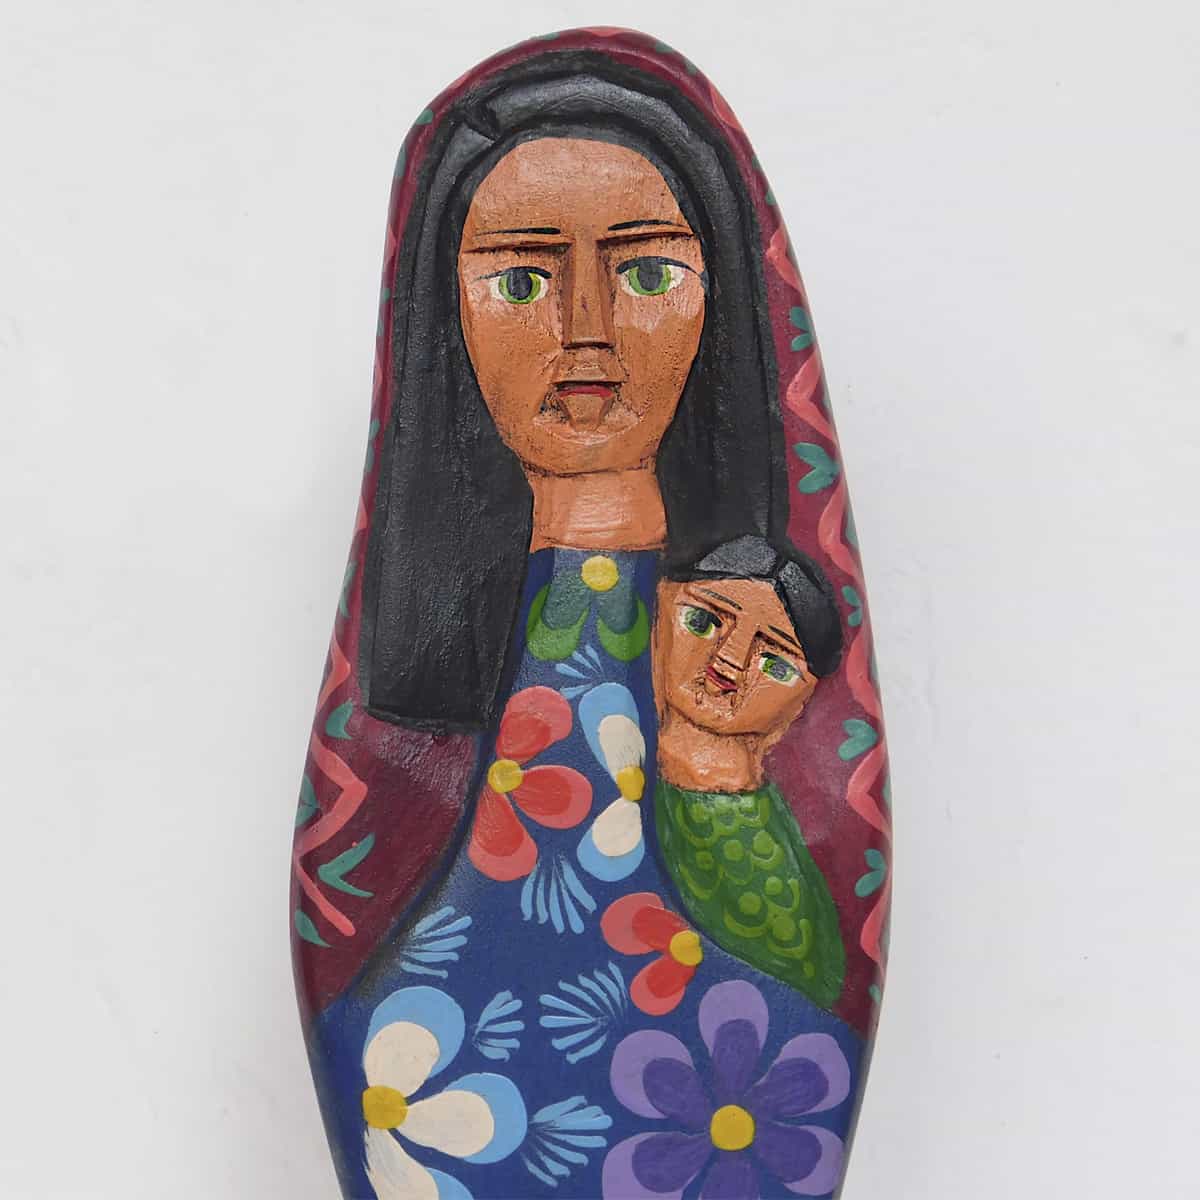 A close-up of a handmade and handpainted virgin mary figurine made of pine wood against a white background. She is holding Jesus and her robes have flowers.